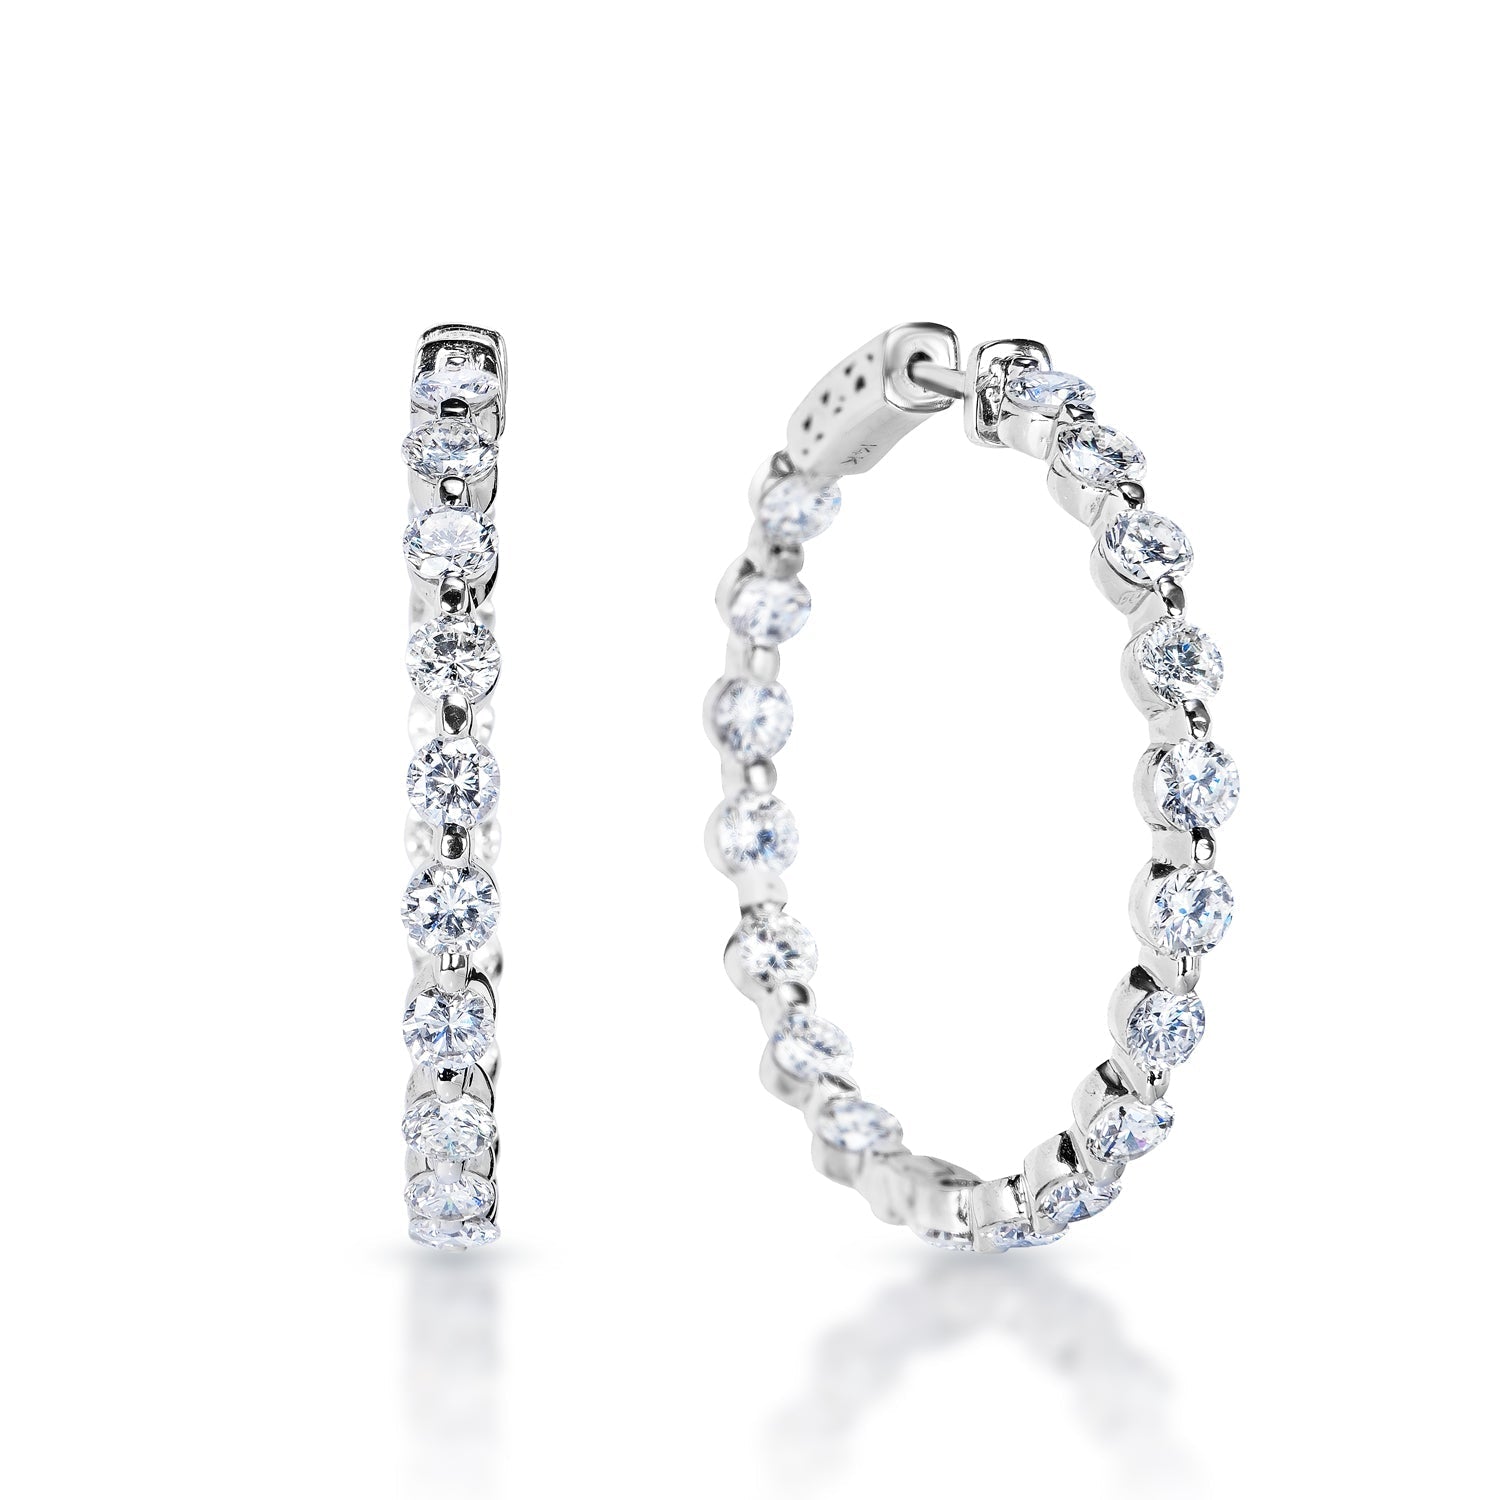 Kaitlyn 7 Carat Round Brilliant Diamond Hoop Earrings in 14k White Gold Front and Side View